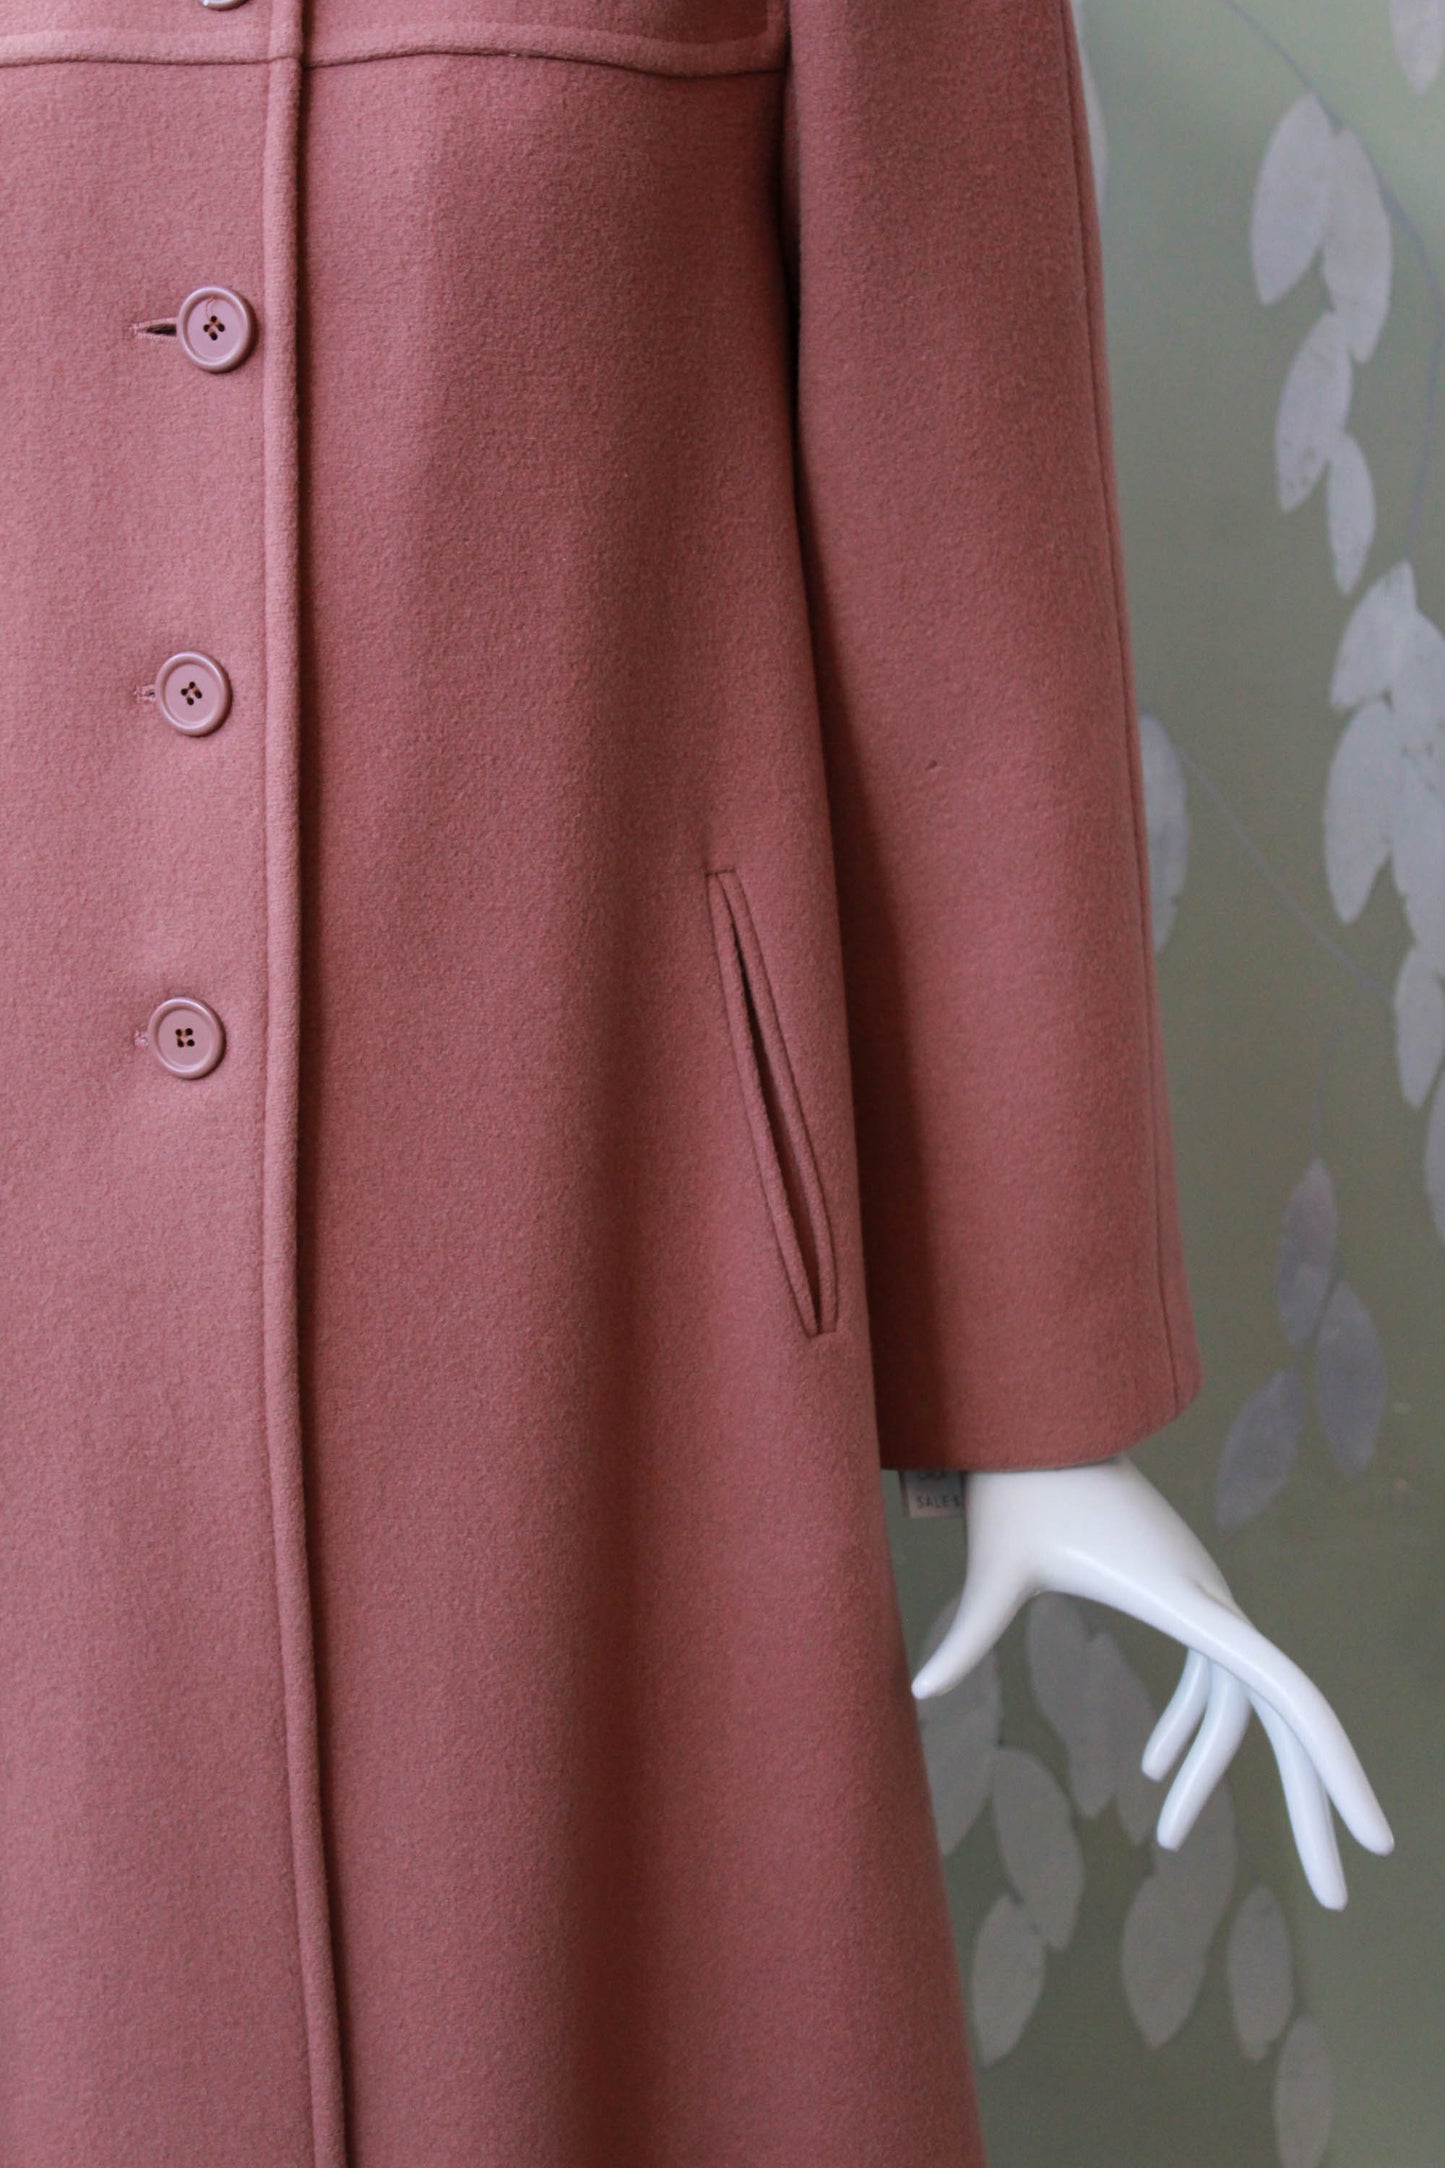 1980s rose pink wool coat with matching scarf vintage Hannah Coats Collection Minimalist Winter Coat Vintage